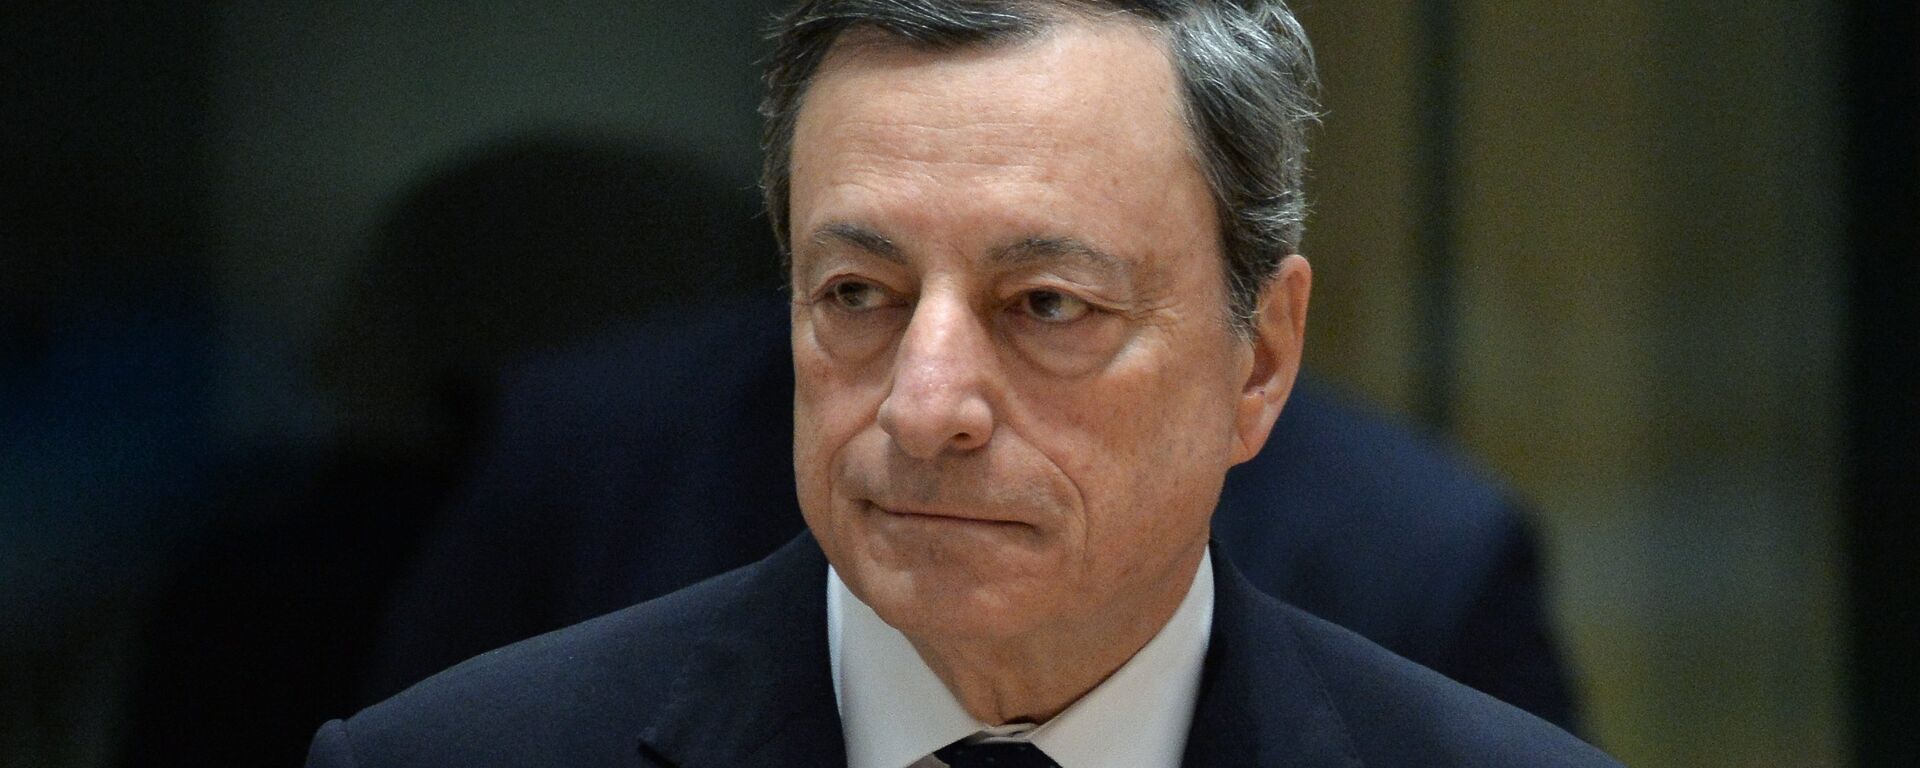 European Central Bank President Mario Draghi is pictured during a EU summit in Brussels - Sputnik International, 1920, 12.02.2021